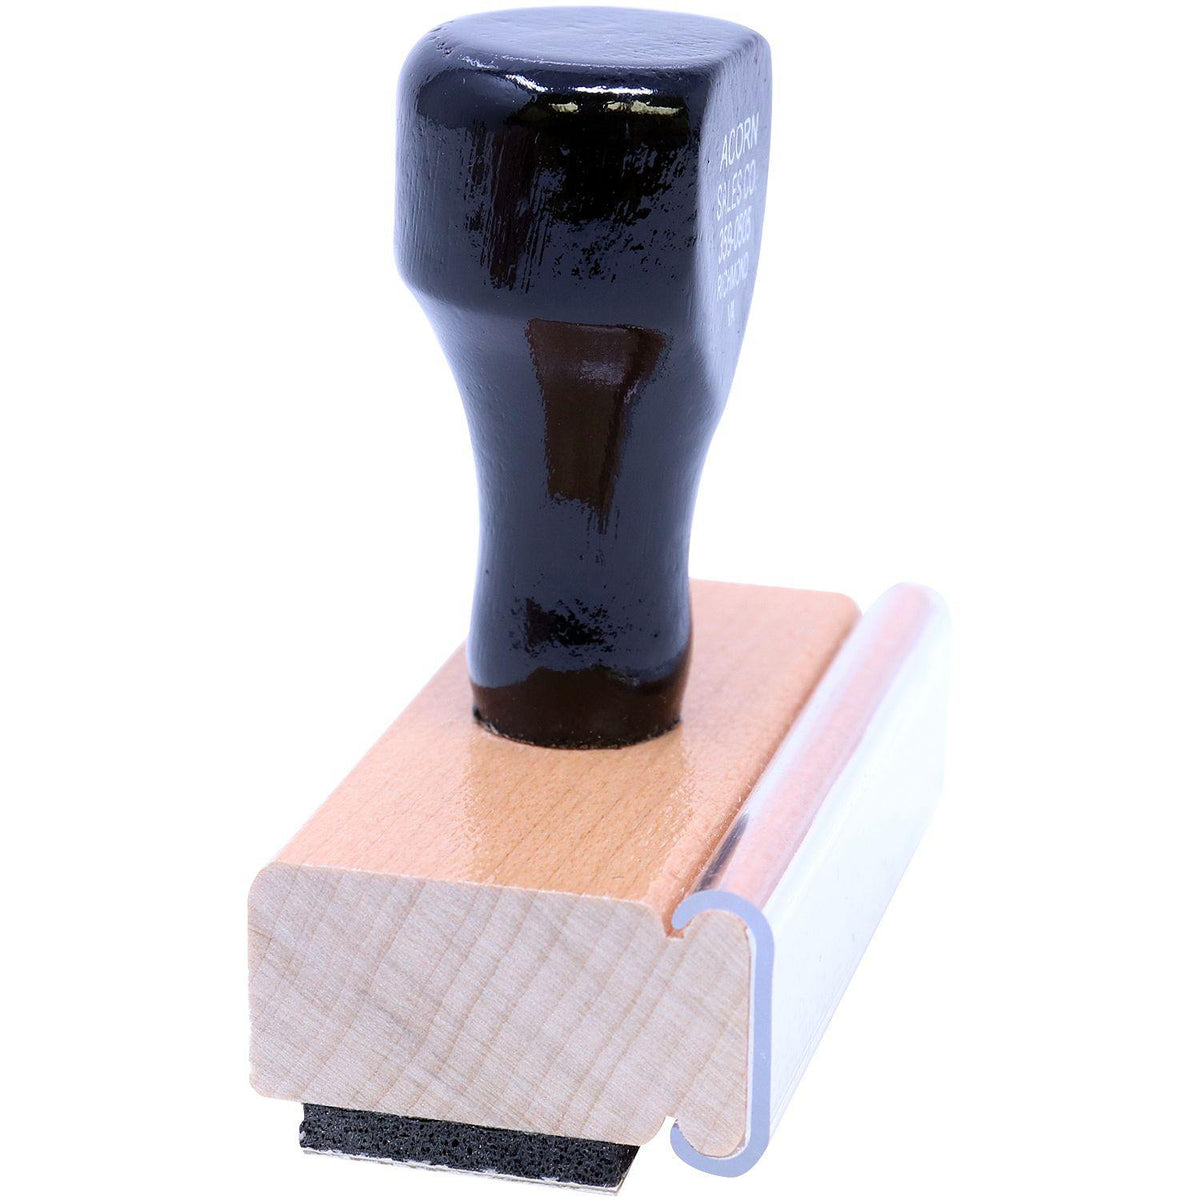 Need To Improve Listening In Class Rubber Stamp - Engineer Seal Stamps - Brand_Acorn, Impression Size_Small, Stamp Type_Regular Stamp, Type of Use_Teacher